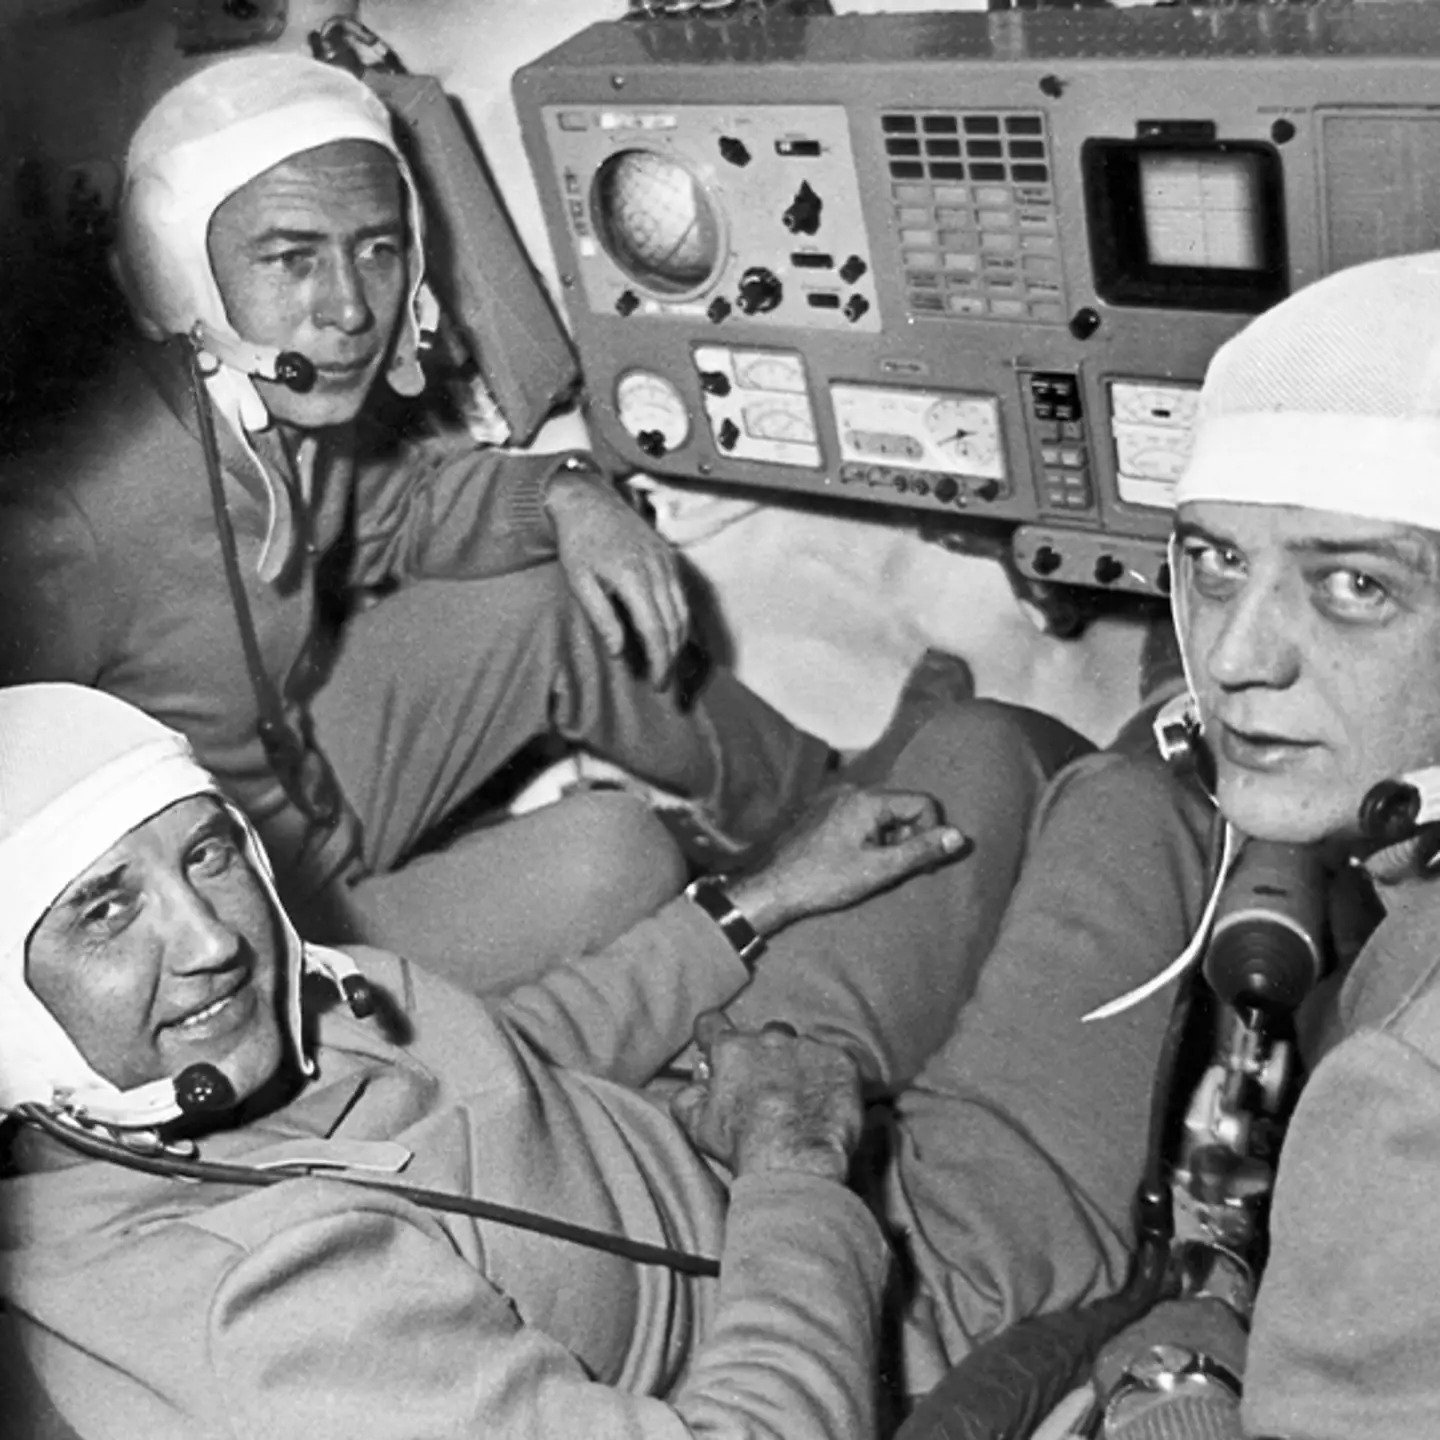 The tragic discovery of the only 3 cosmonauts to die in space